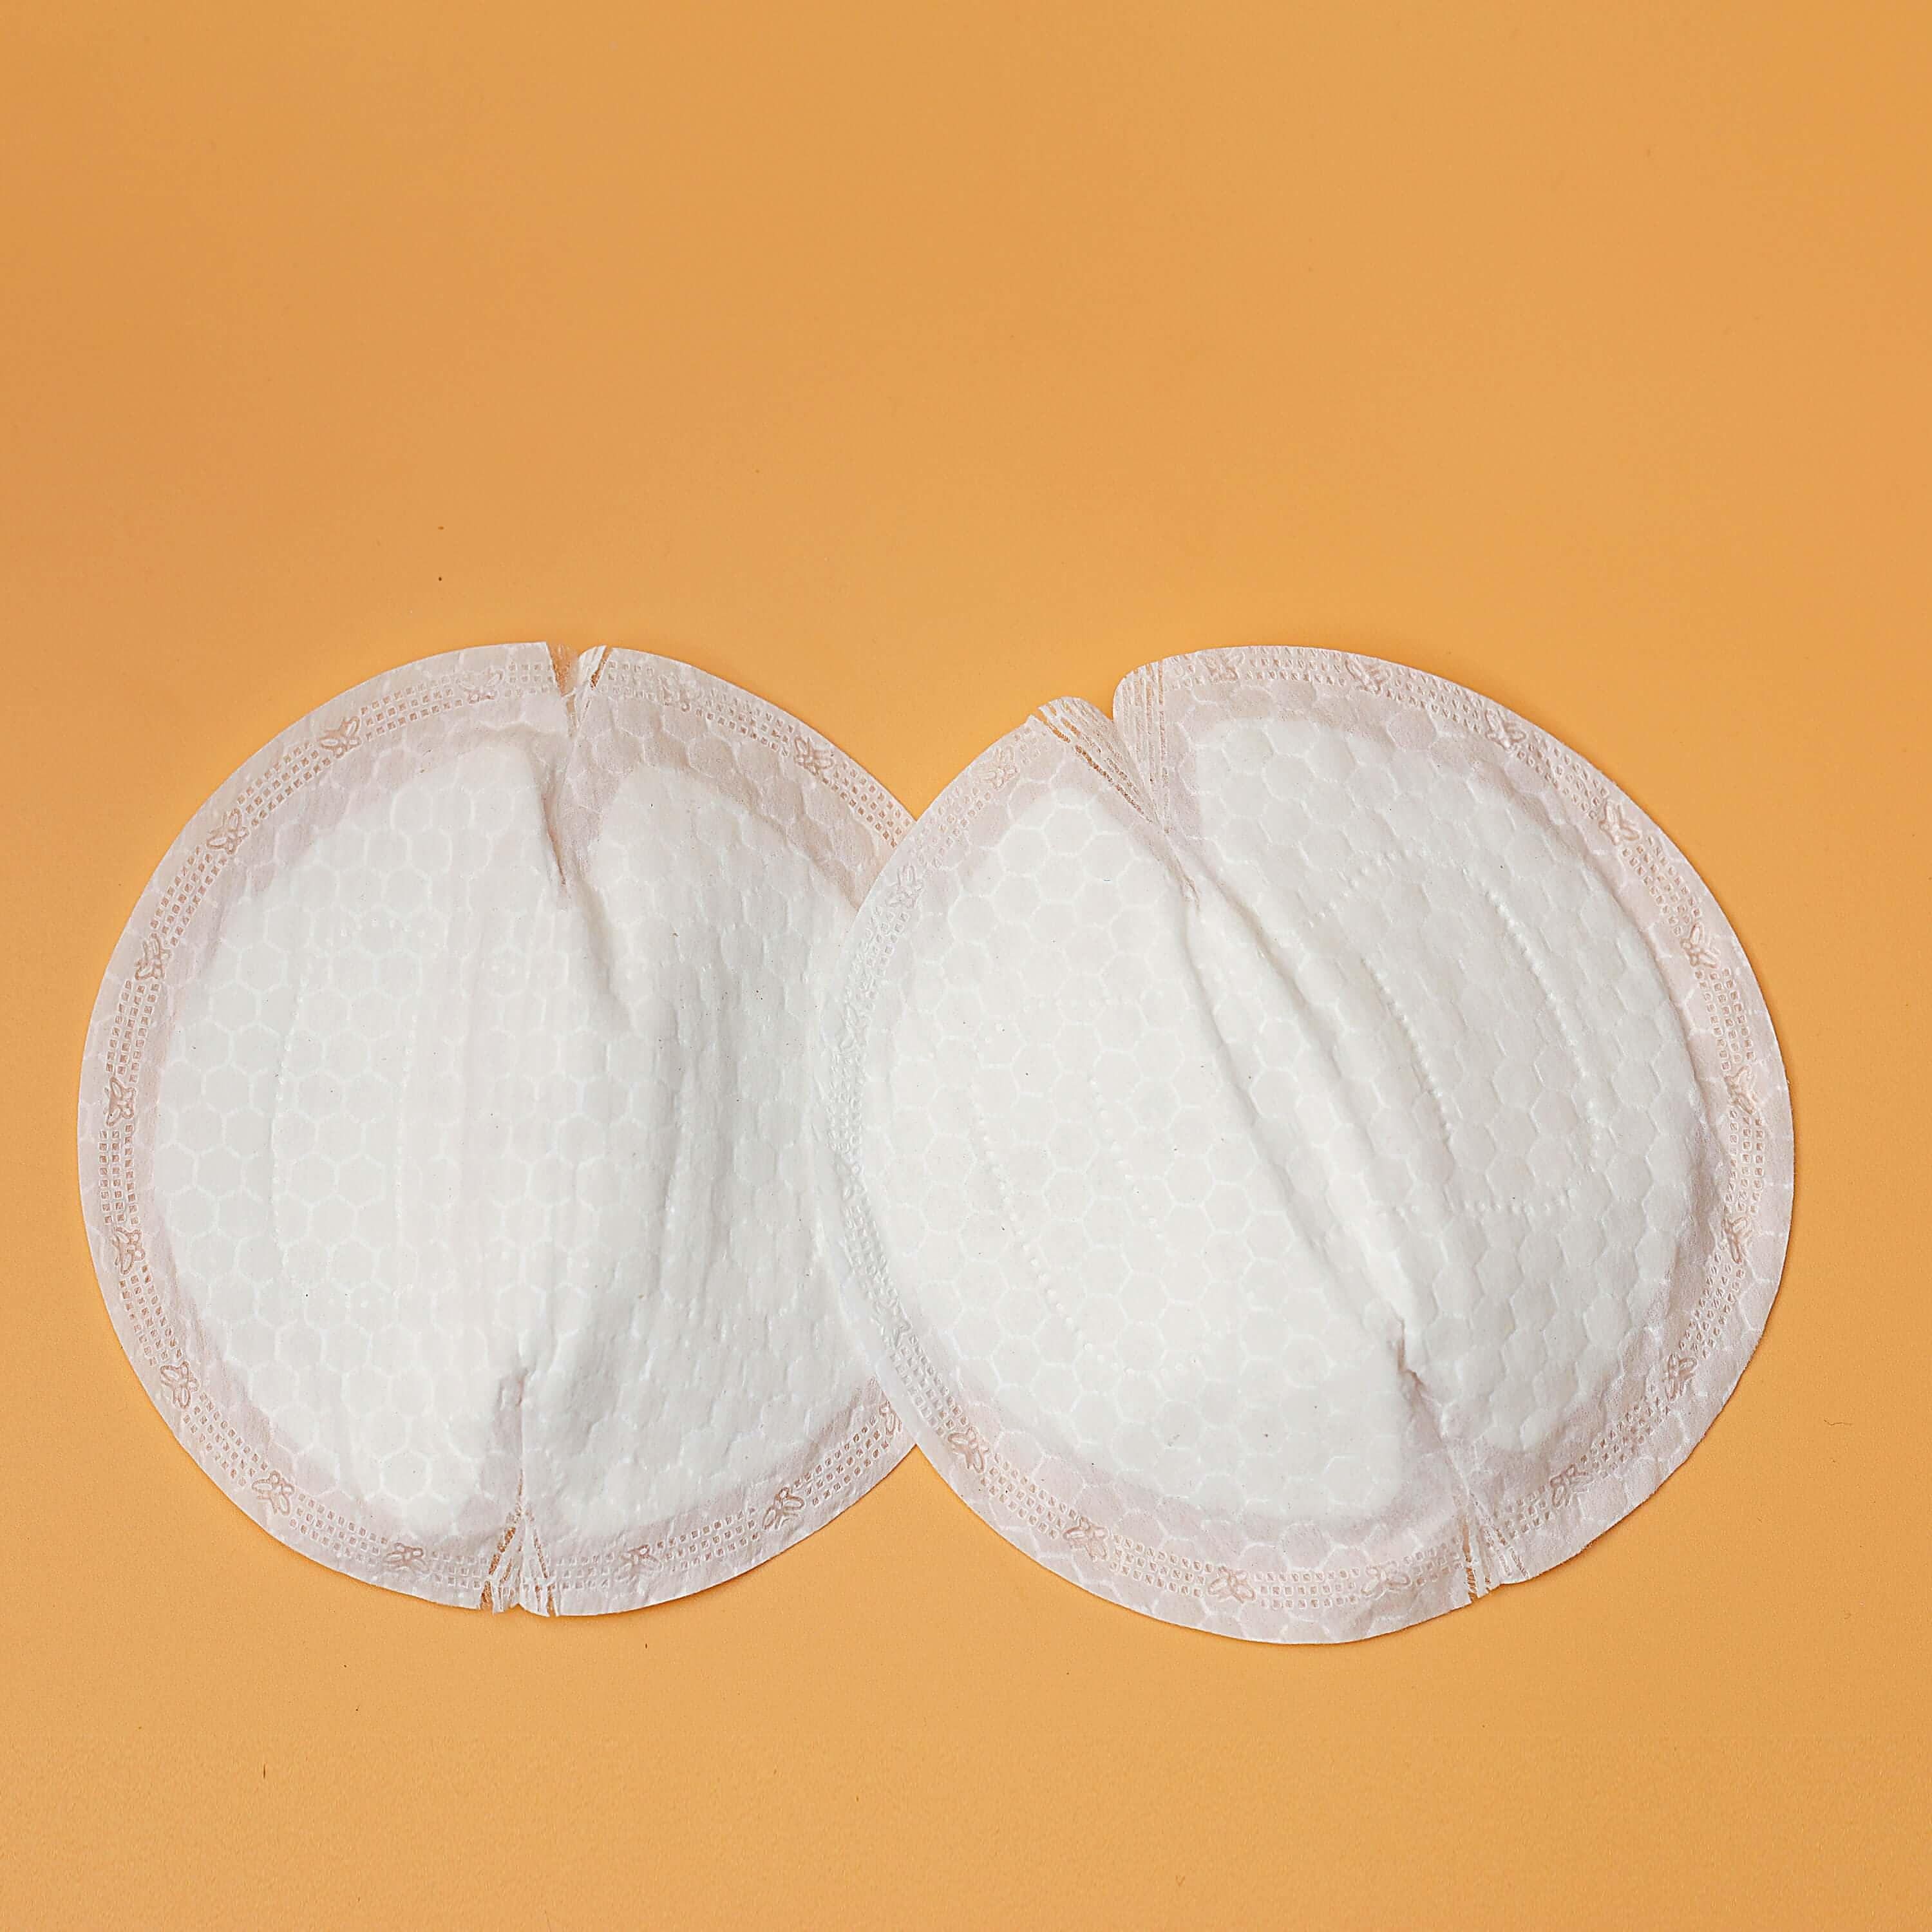 First Days Hydrogel Breast Pads (10-pack) – Mama's Nest